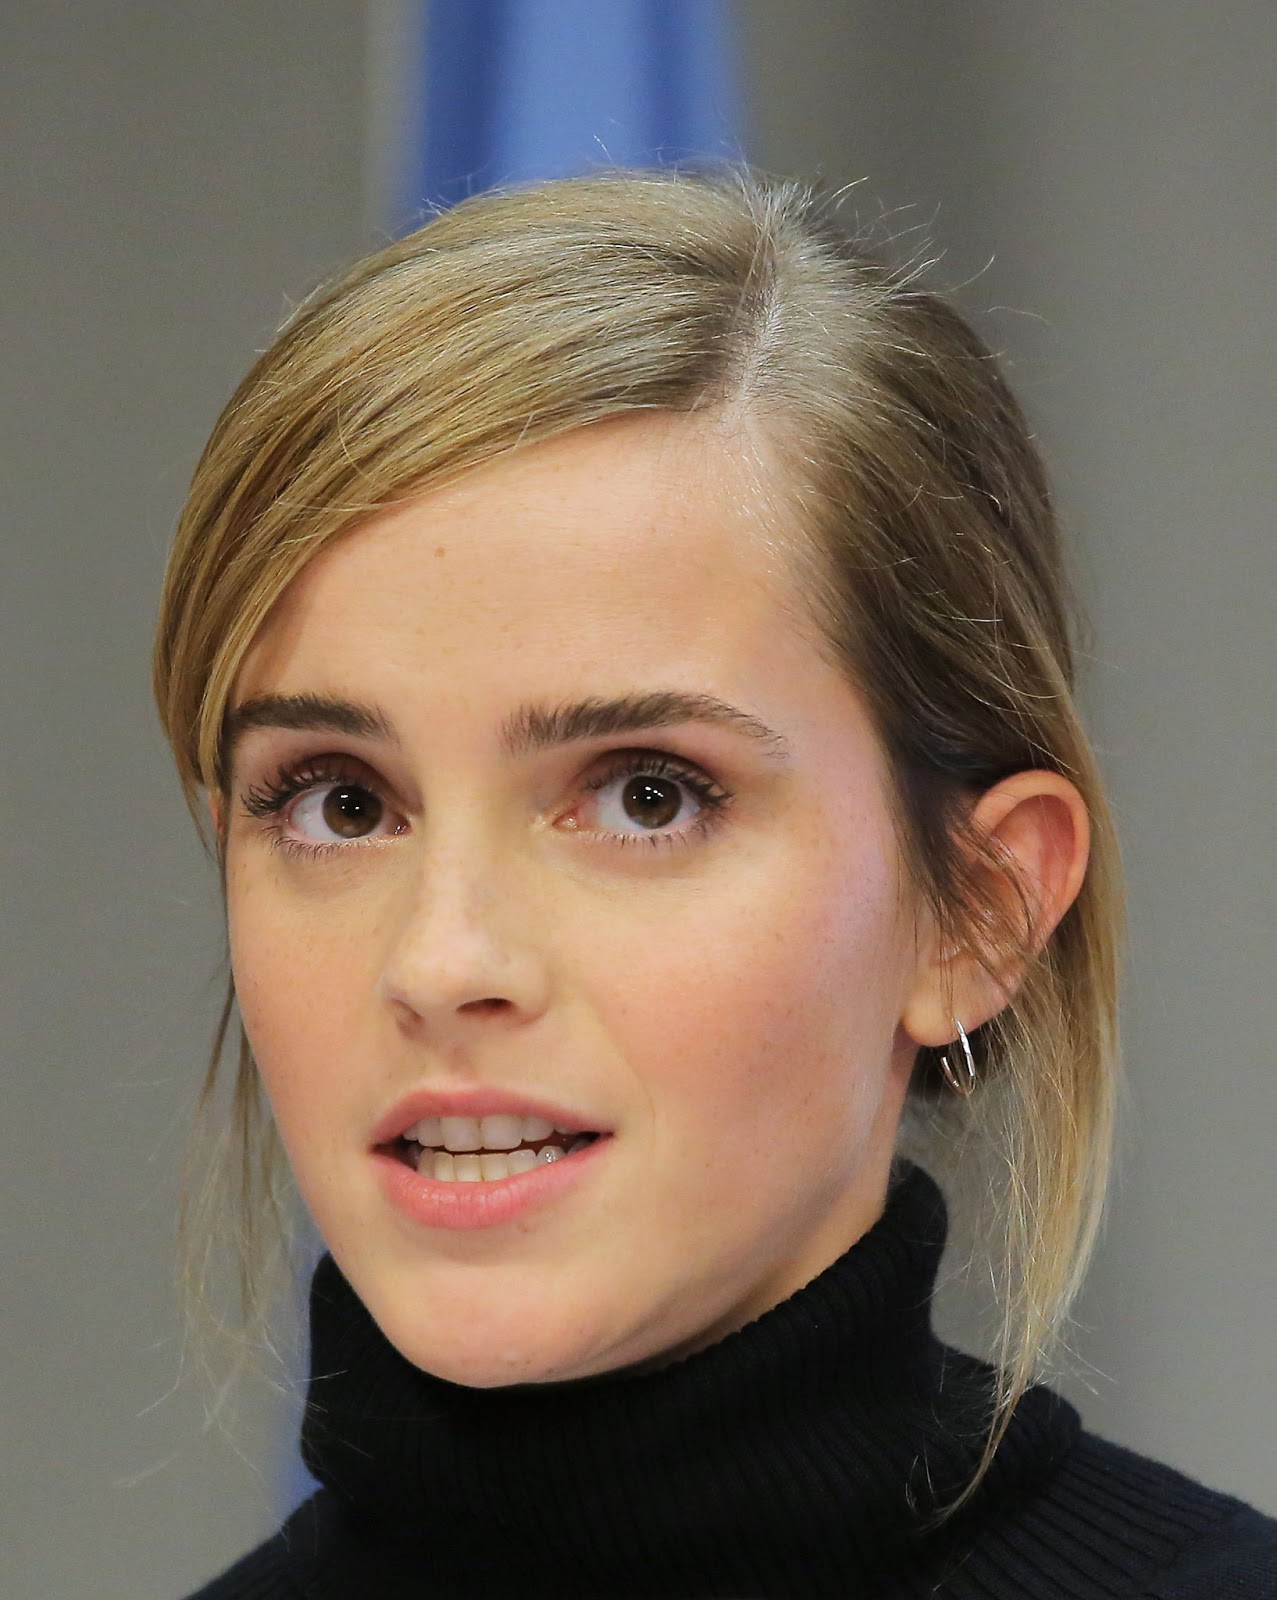 Emma Watson at the United Nations in New York September 20, 2016.